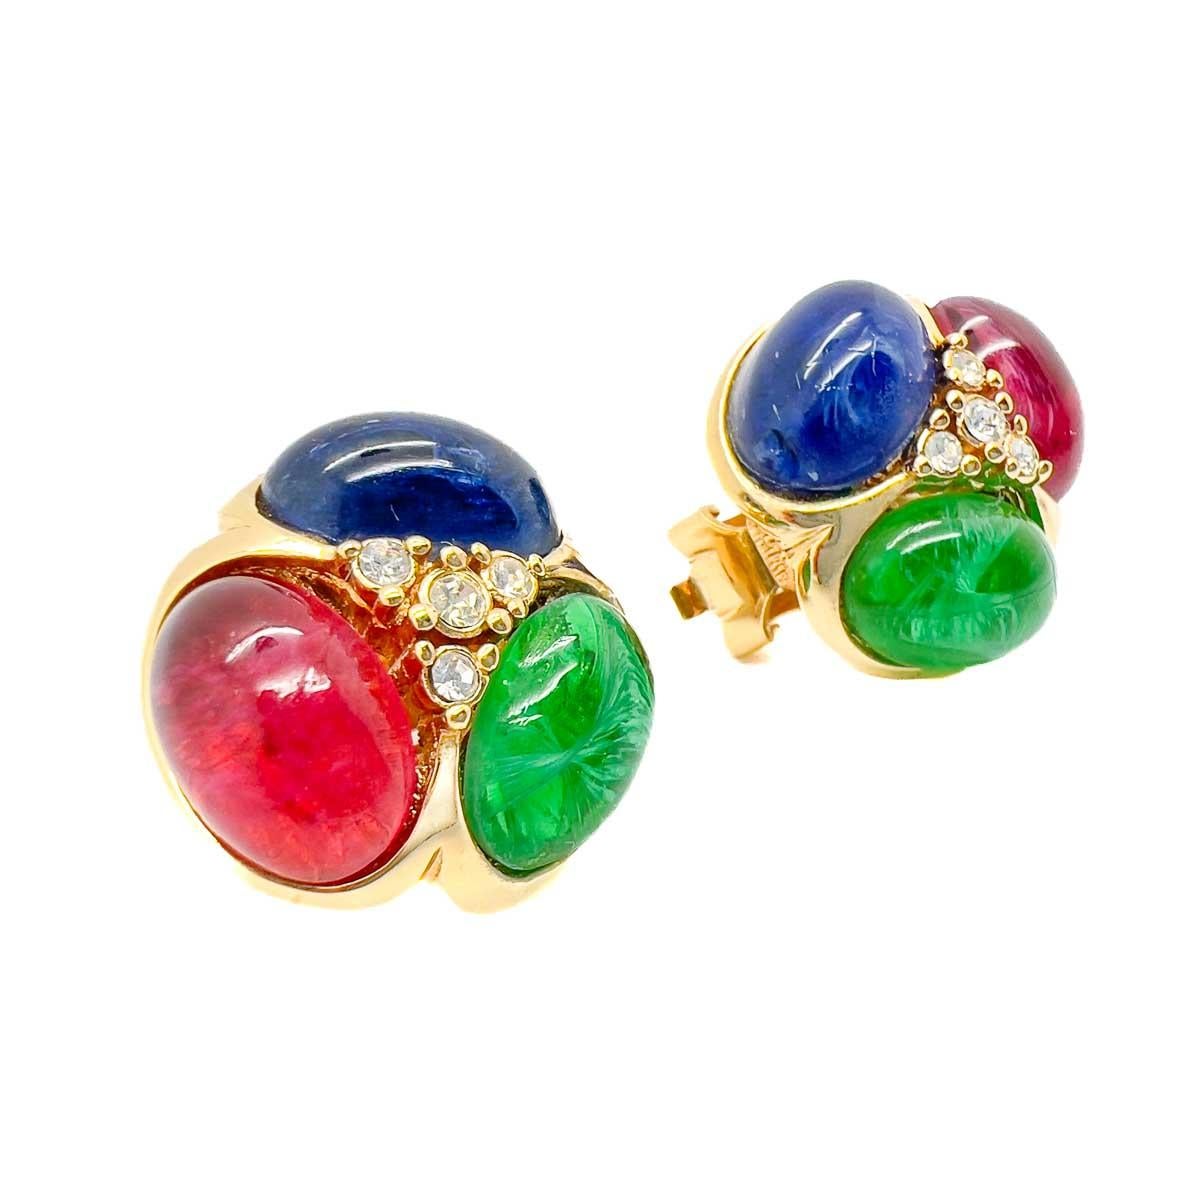 A pair of Vintage Grossé Cabochon Earrings. Heavenly jewel coloured glass cabochons imitate flawed precious stones including sapphire, ruby and emerald. The epitome of chic, timeless style.
From modernist to centuries old styles, premiere German